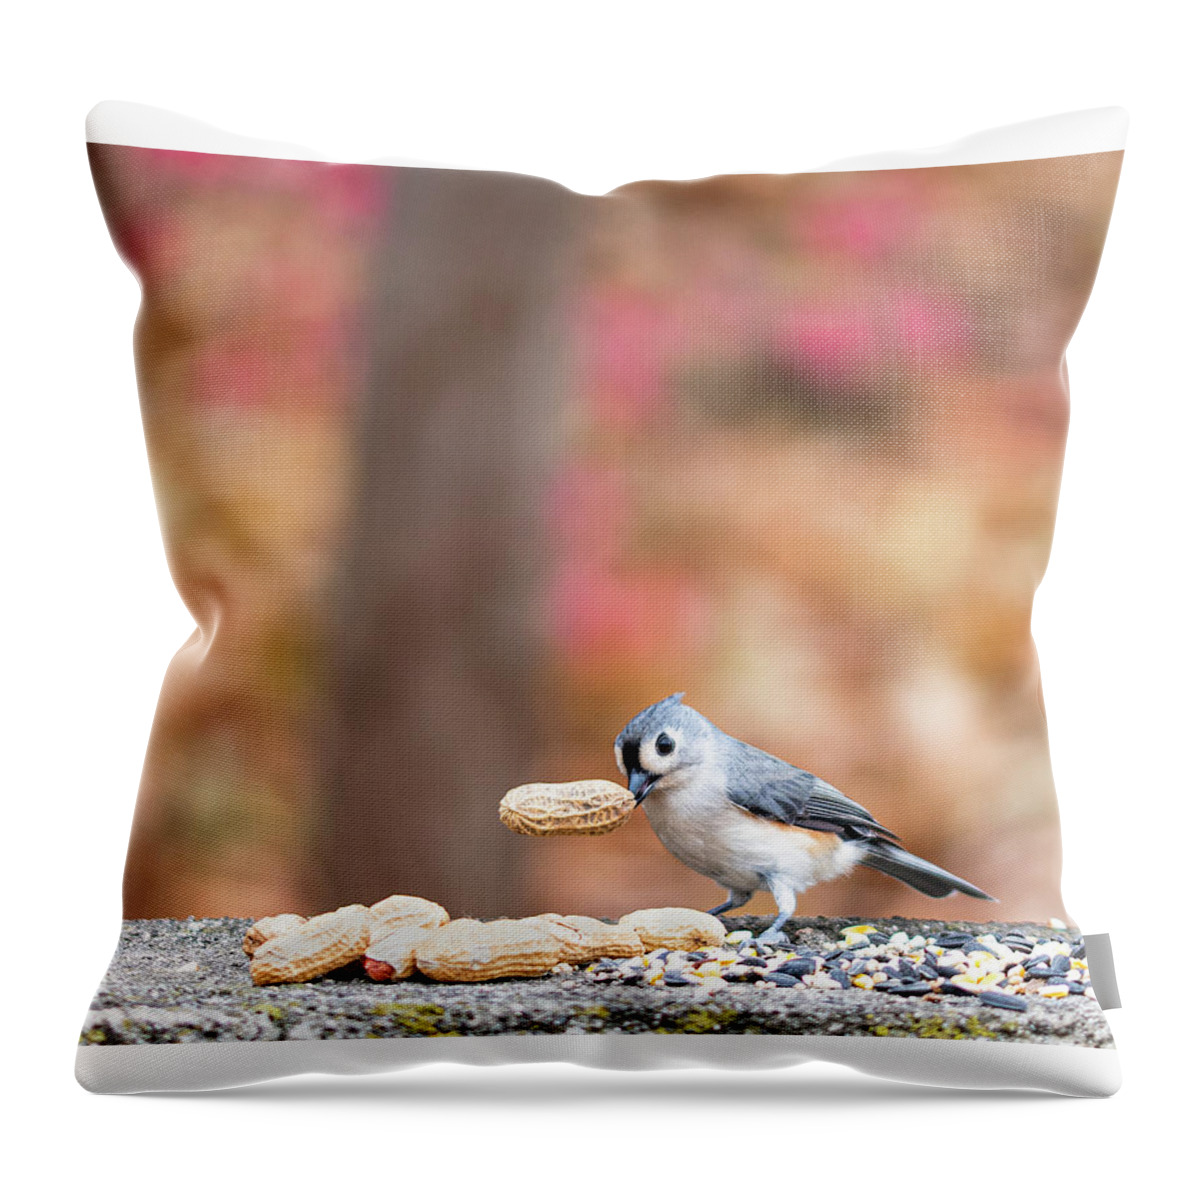 Little Gray Bird Throw Pillow featuring the photograph Tufted Titmouse with Peanut Cropped by Ilene Hoffman